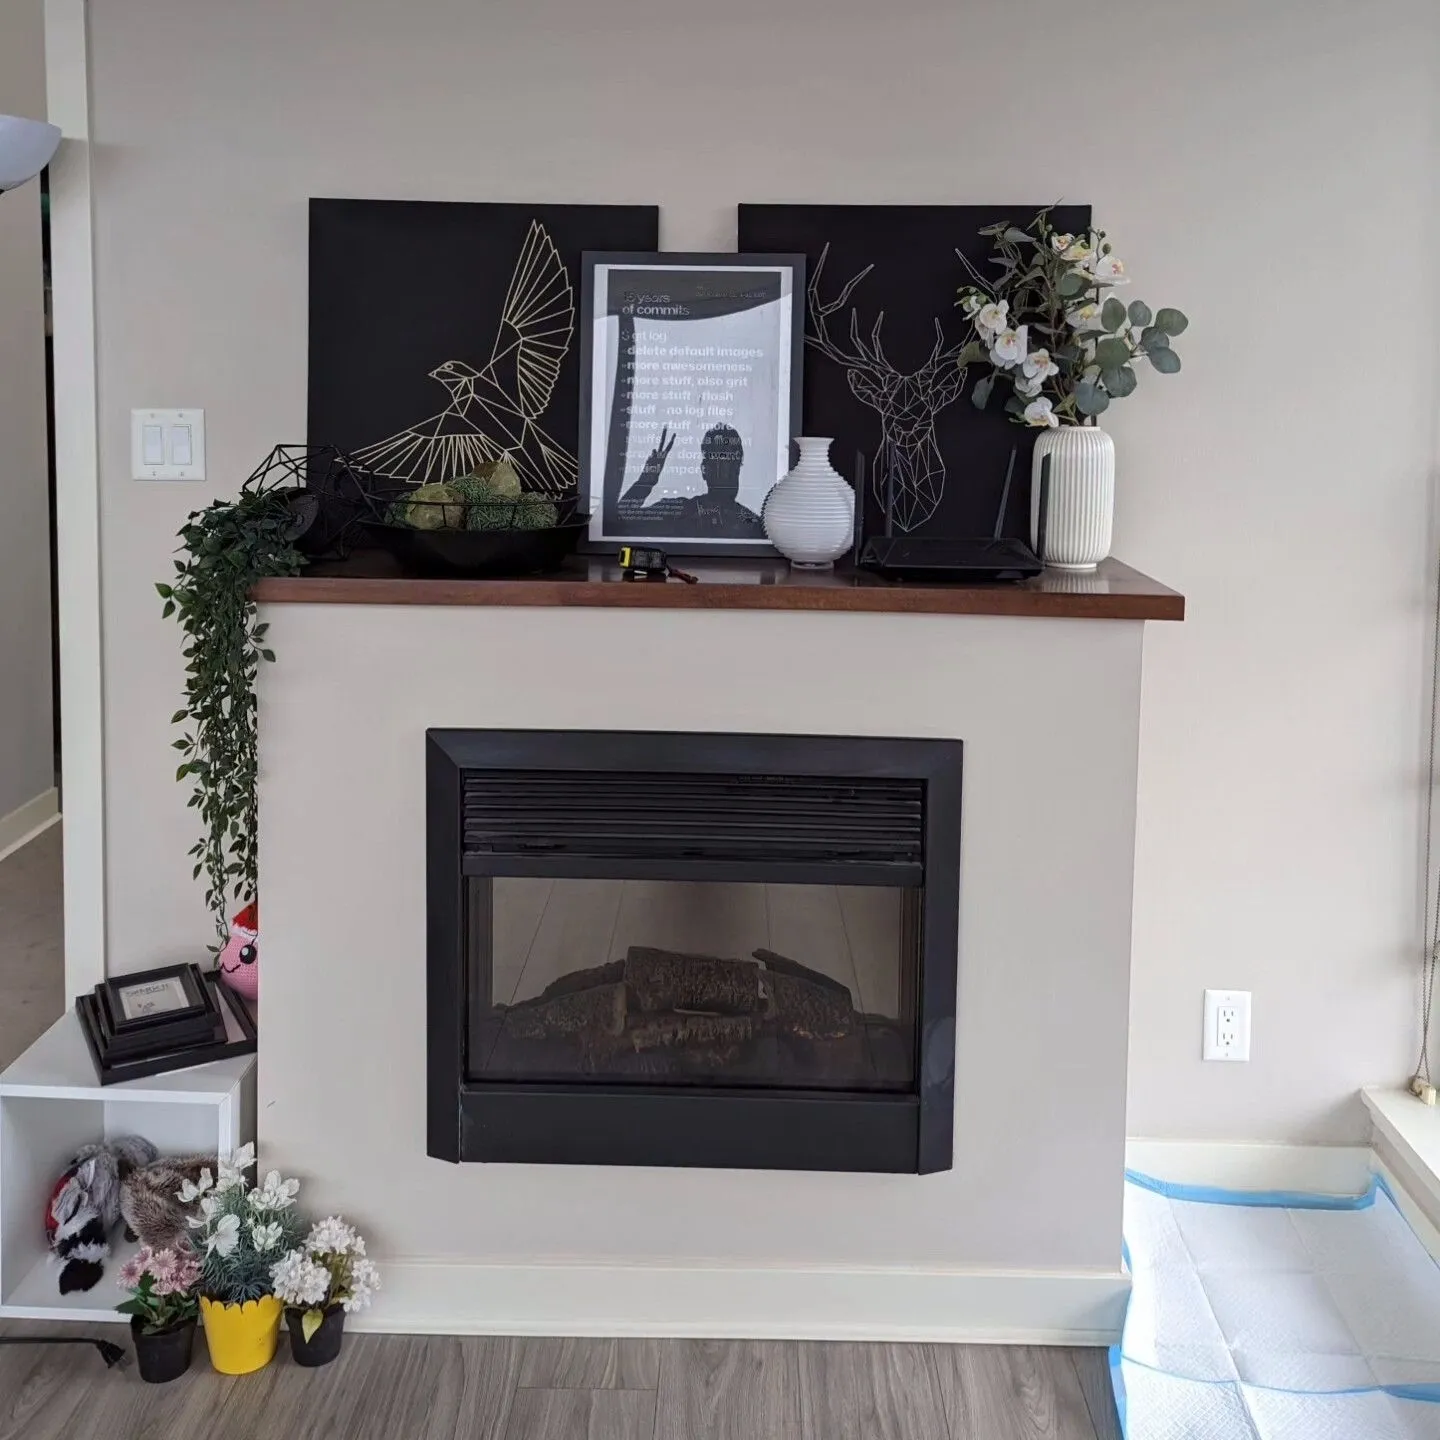 A fireplace with plants and pictures on the mantle.